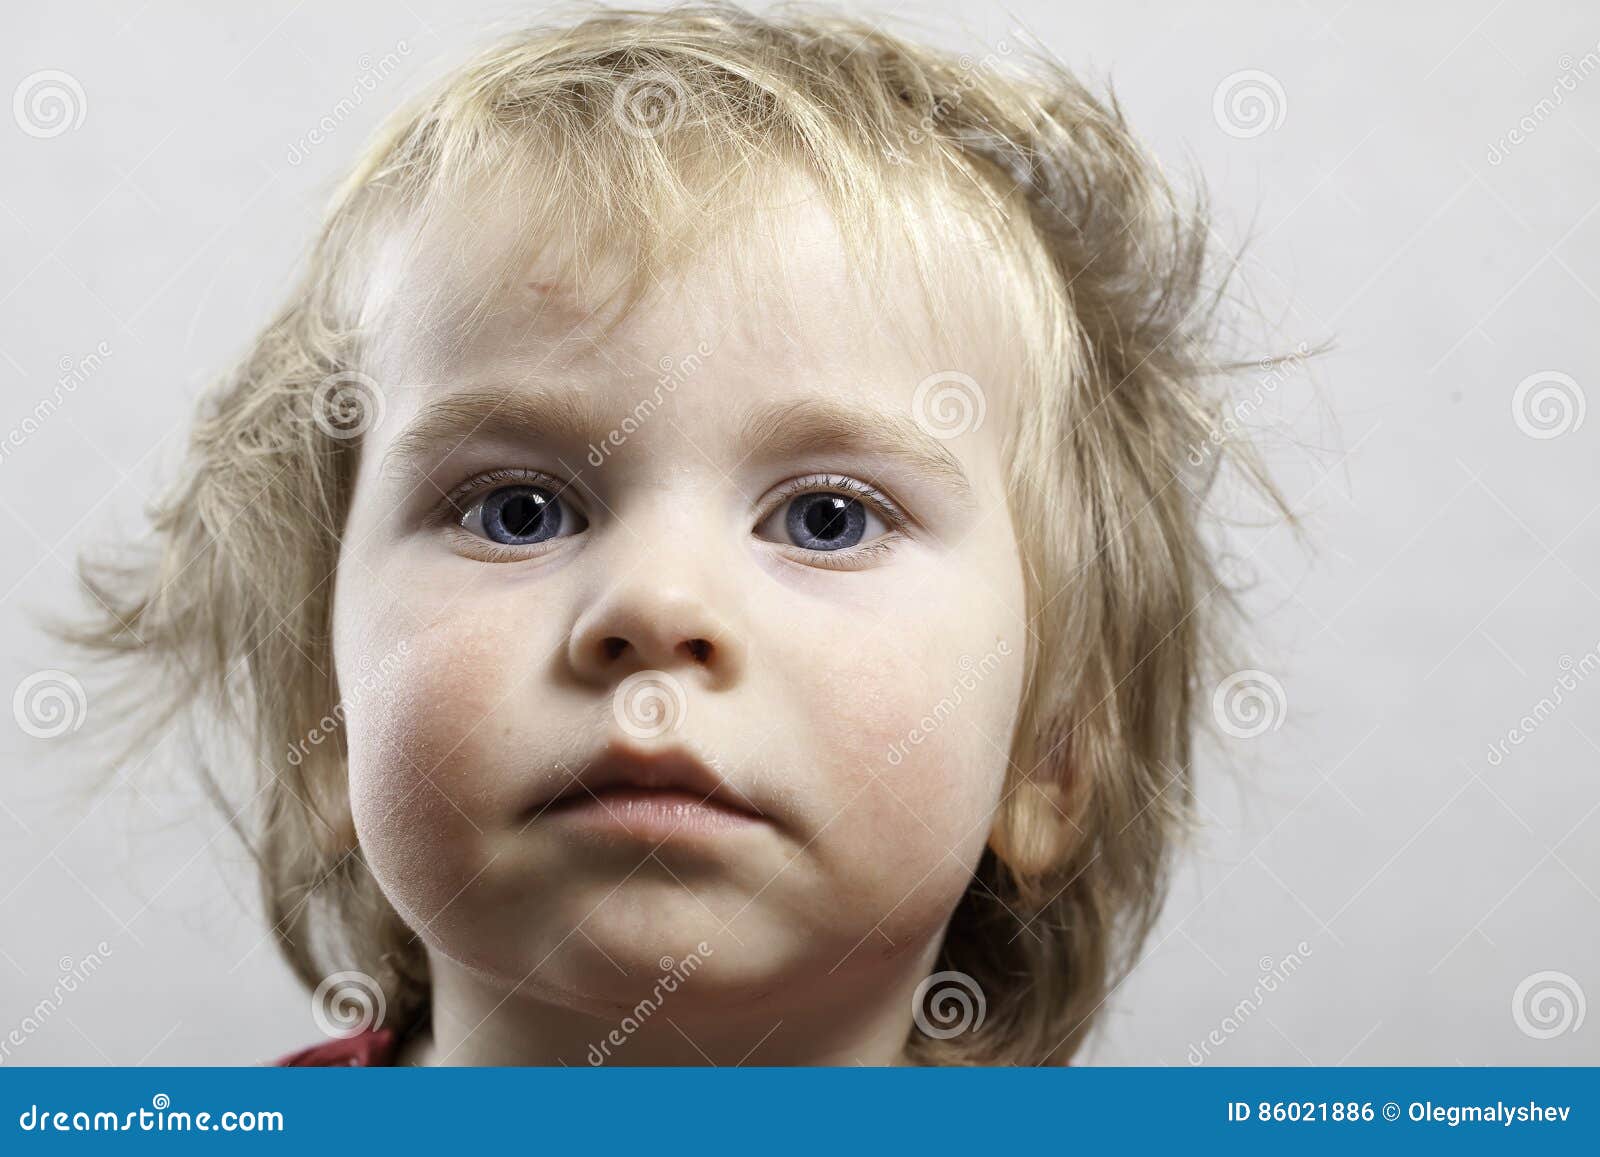 Toddler with Blonde Hair and Bow - wide 4